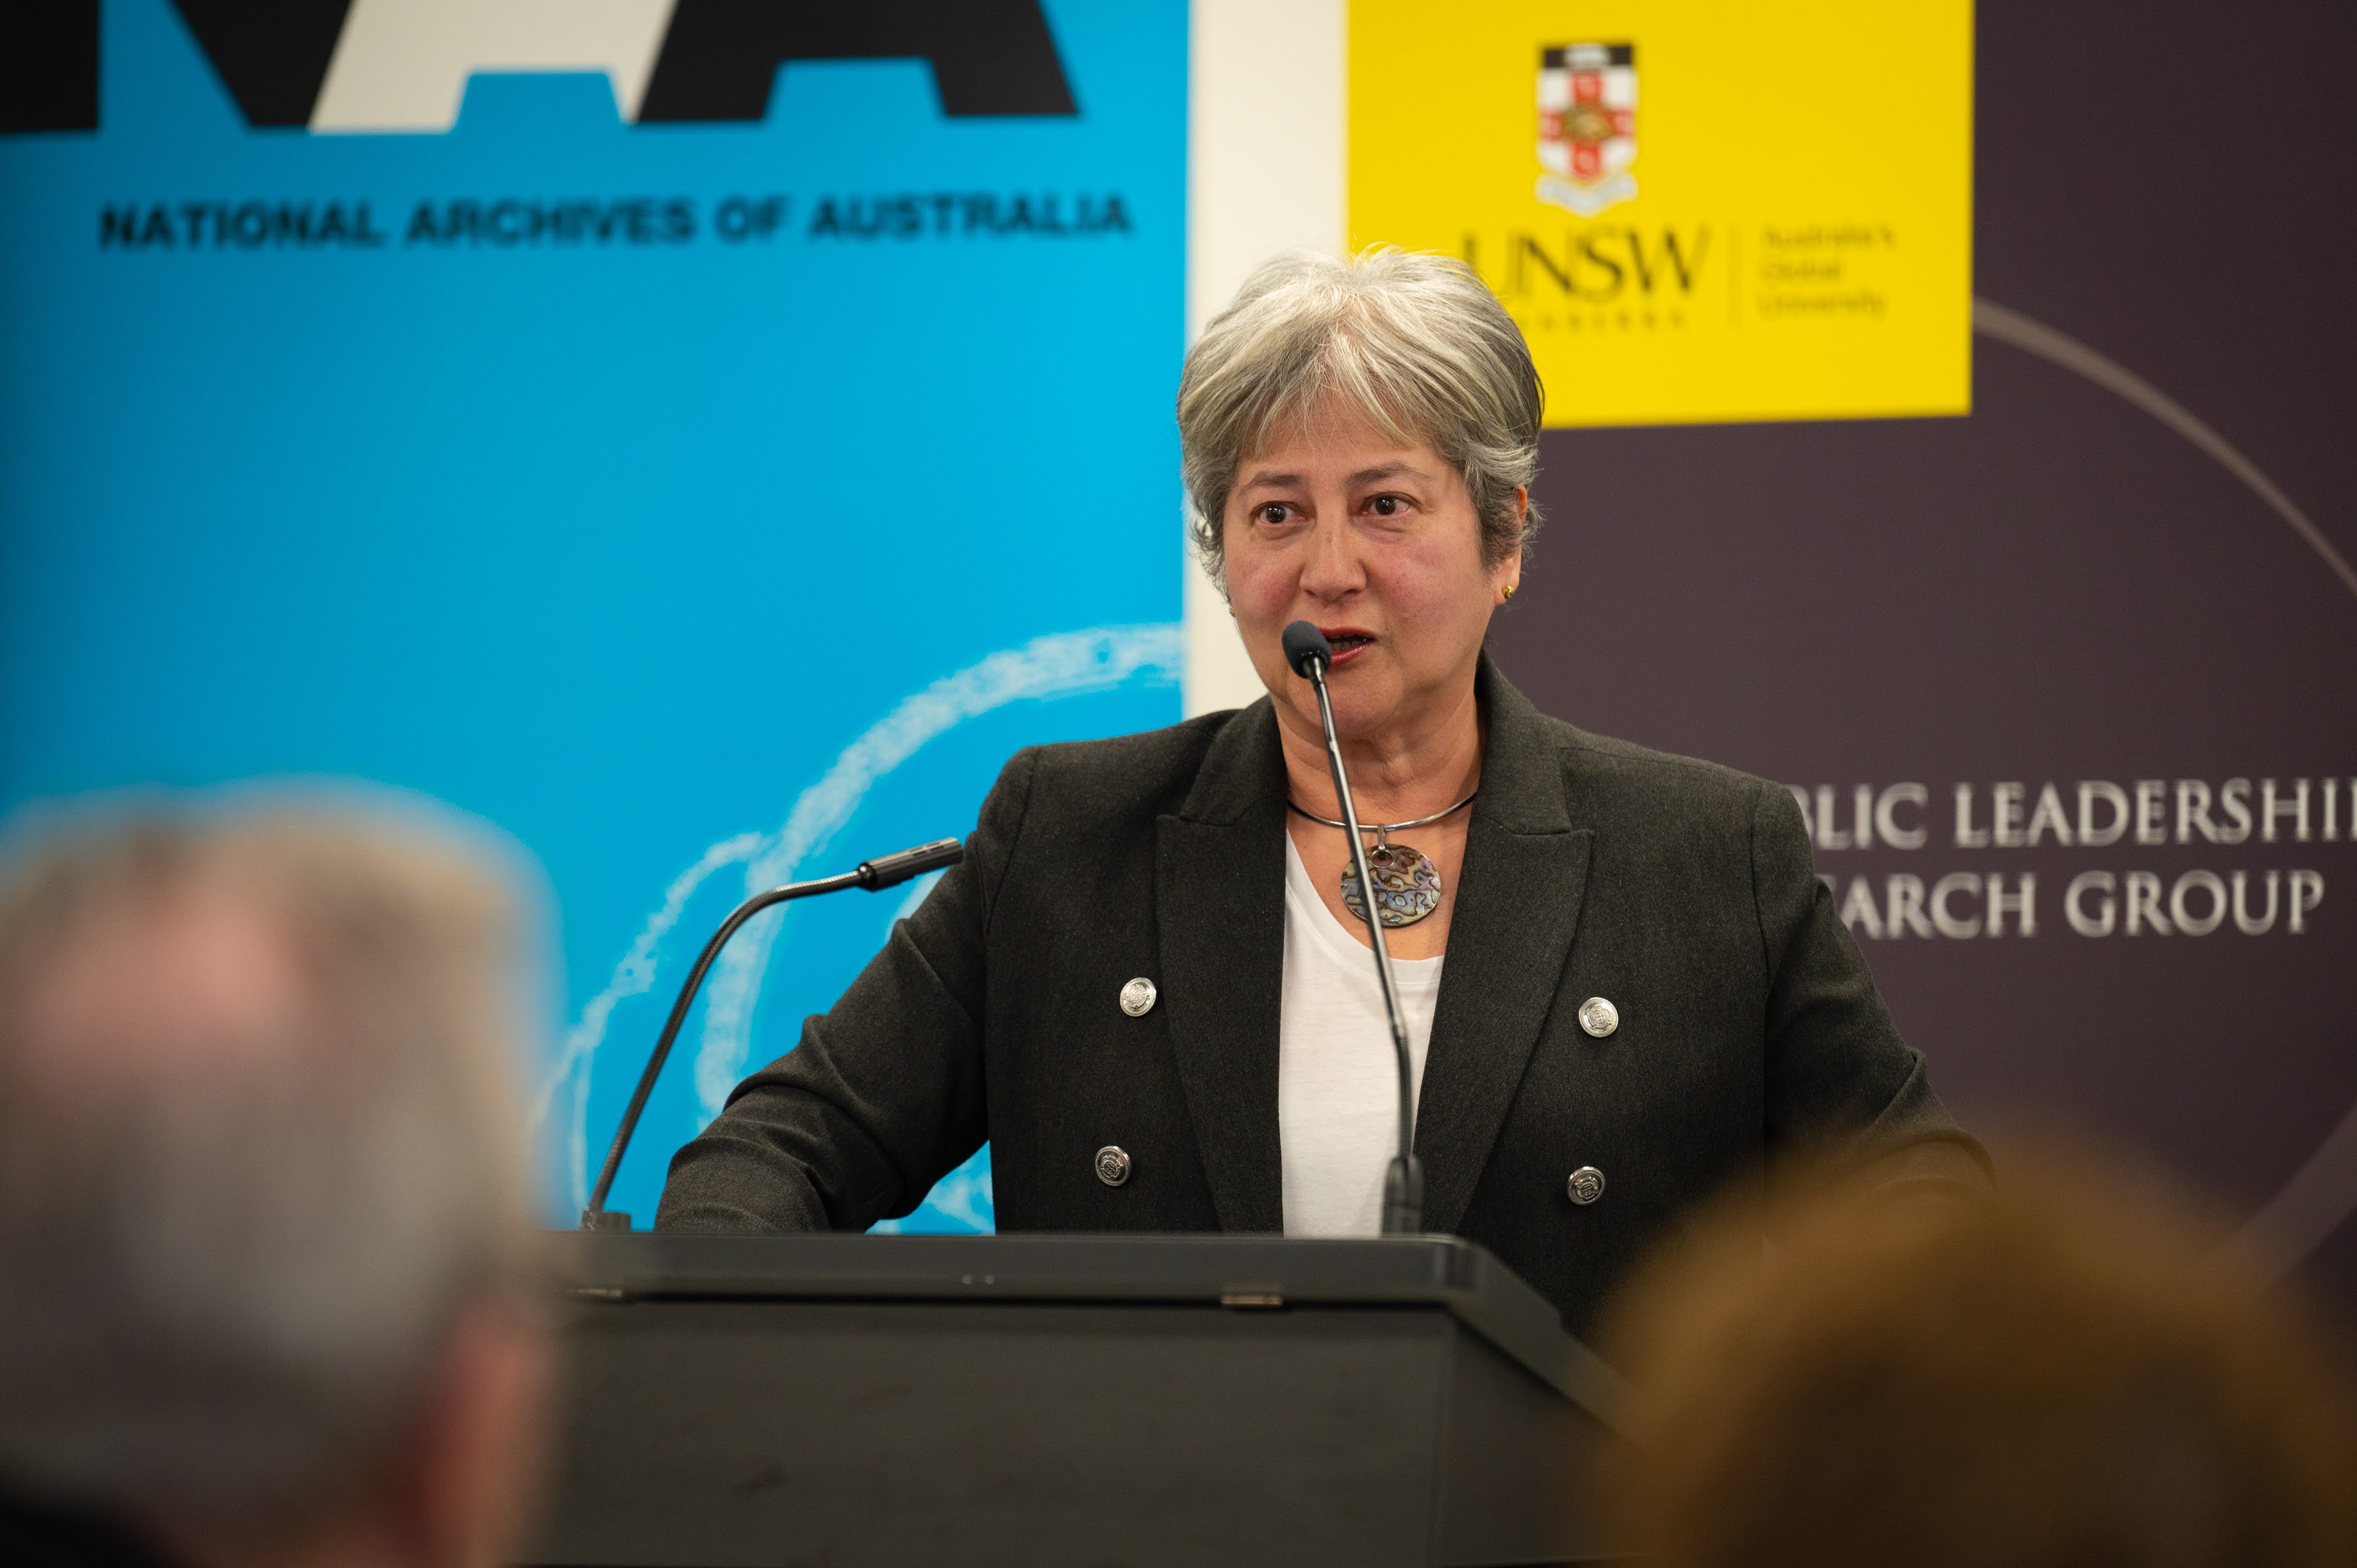 Her Excellency, Vicki Treadell, British High Commissioner to Australia  The John Howard Prime Ministerial Library in partnership with the National Archives of Australia hosts an evening with Sir Anthony Seldon.